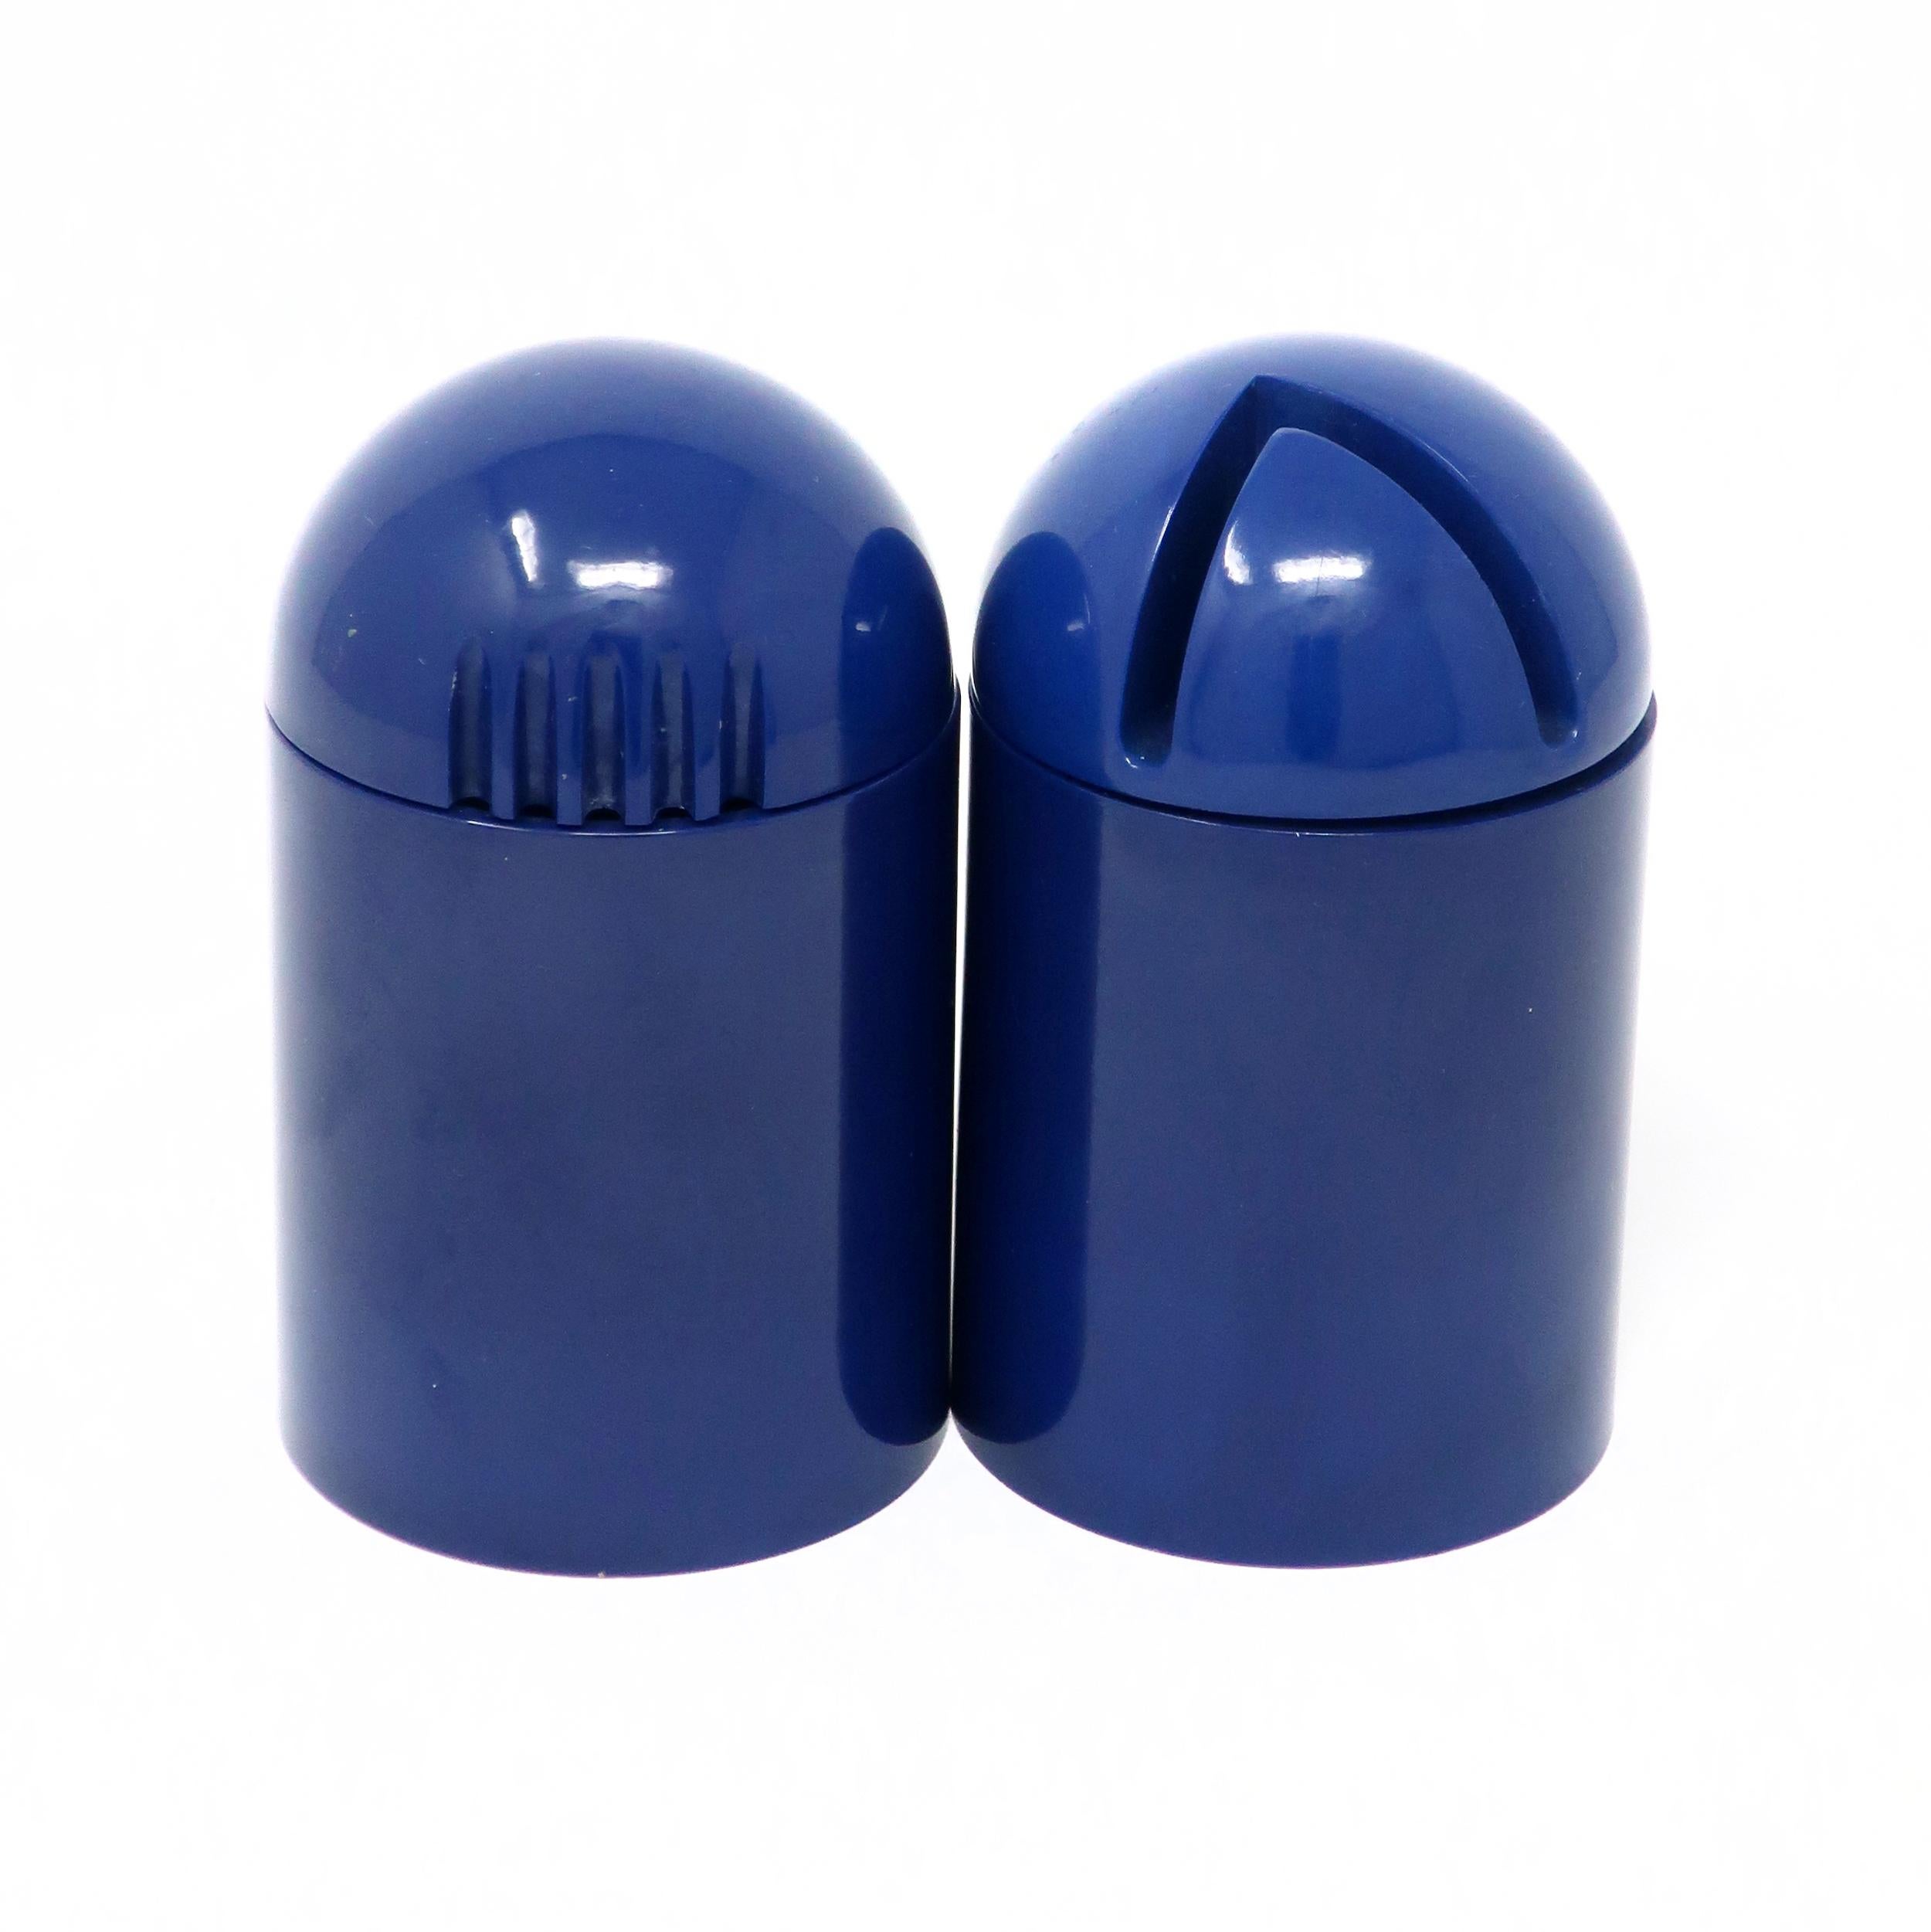 Originally designed by Enzo Mari (a prolific Italian industrial and furniture design master) for Danese Milano, this set of blue plastic pepper grinder and salt shaker were designed in 1969 and 1972, respectively, and made by Alessi, the Italian